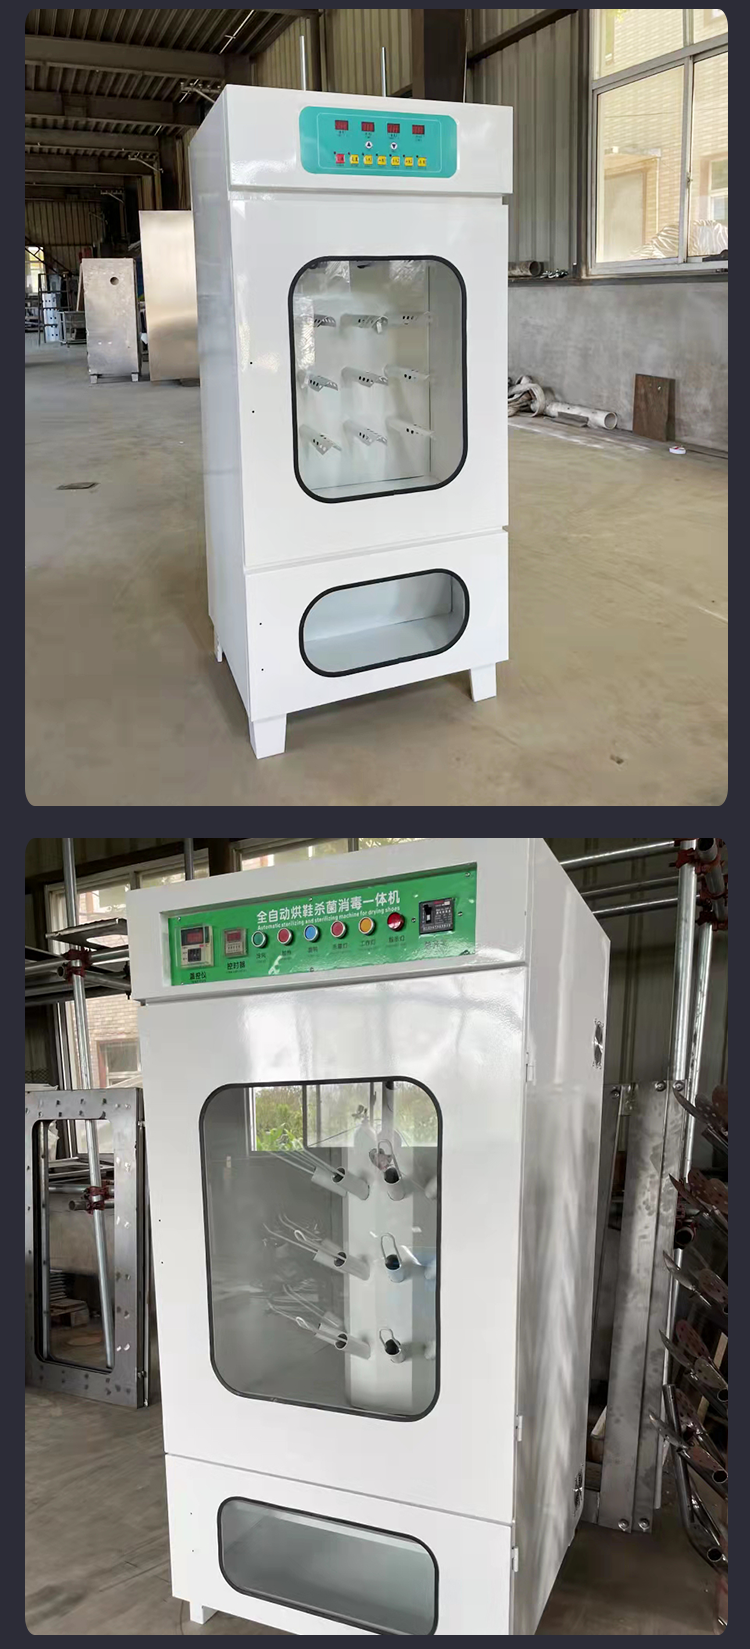 Stainless Steel Disinfection Shoe Drying Machine Shoe Drying Cabinet Commercial Fully Automatic High Temperature Shoe Drying Machine Equipment